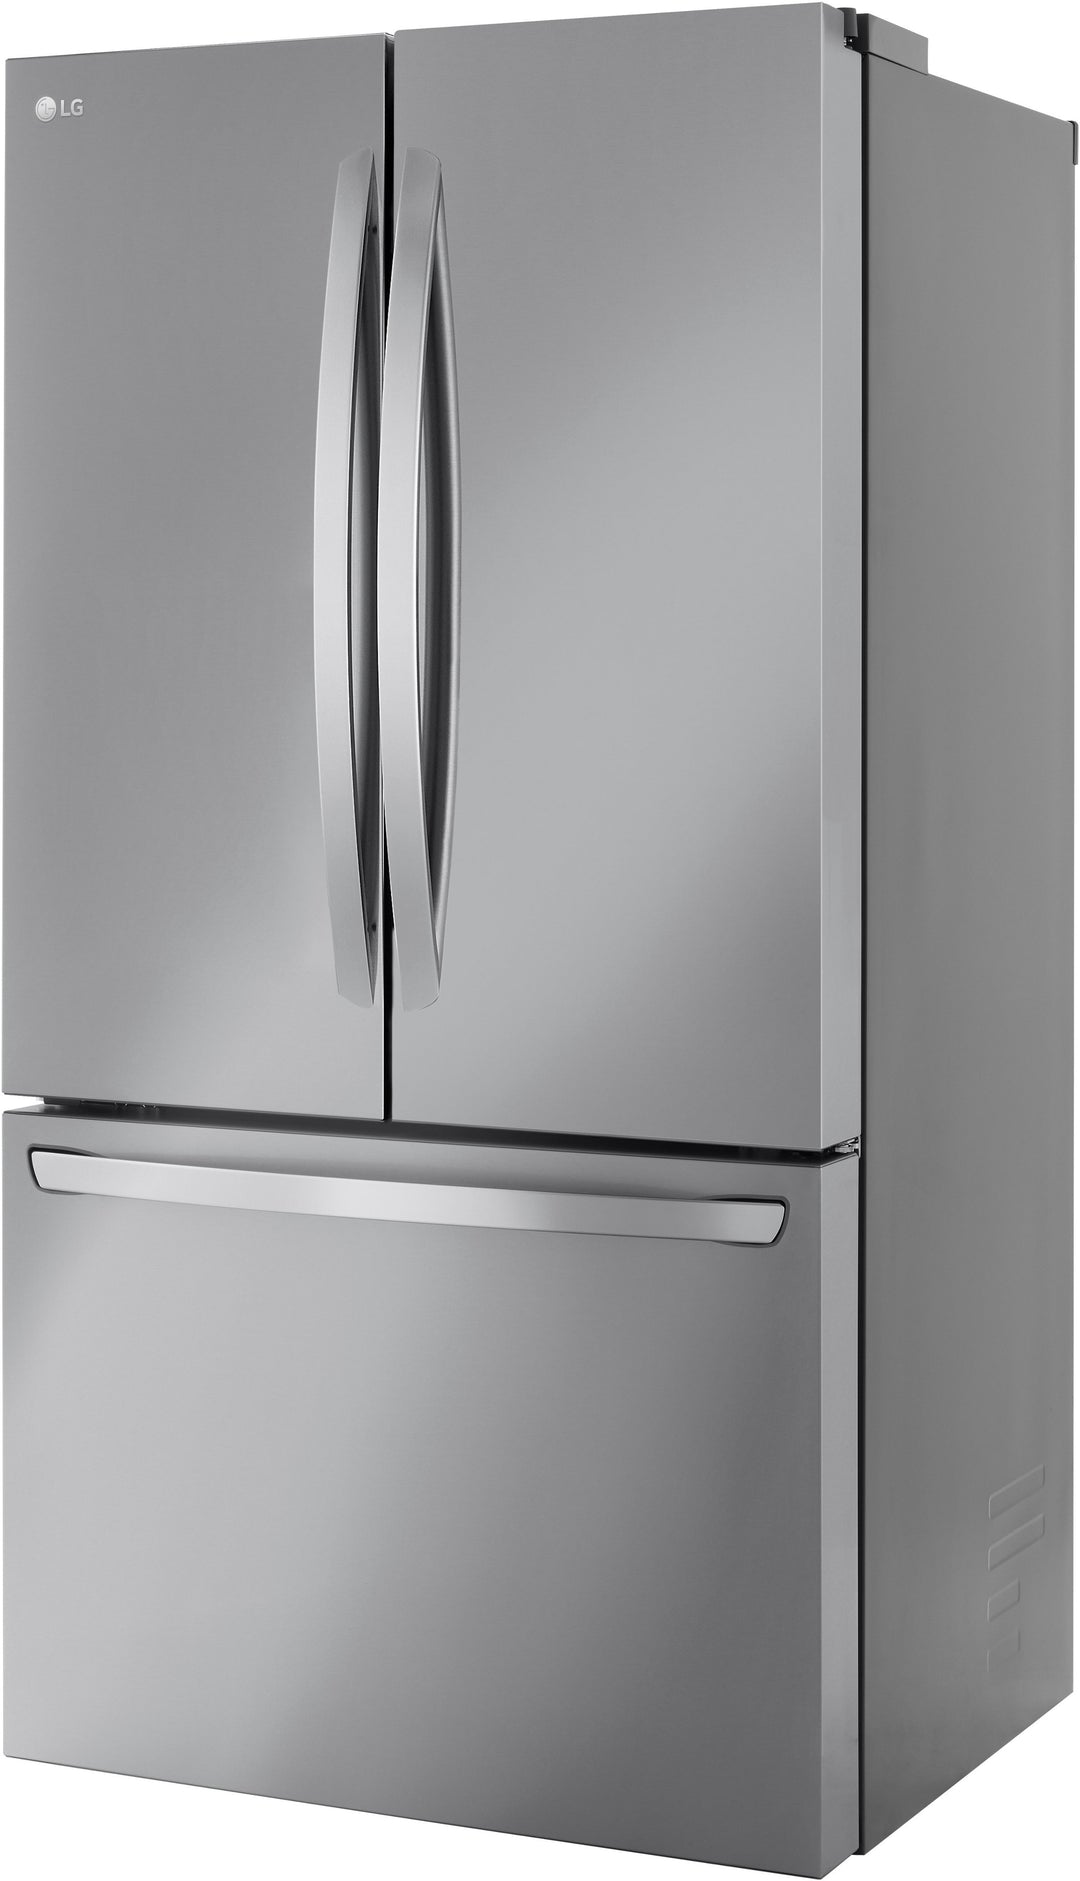 LG - 31.7 Cu. Ft. French Door Smart Refrigerator with Internal Water Dispenser - Stainless Steel_2